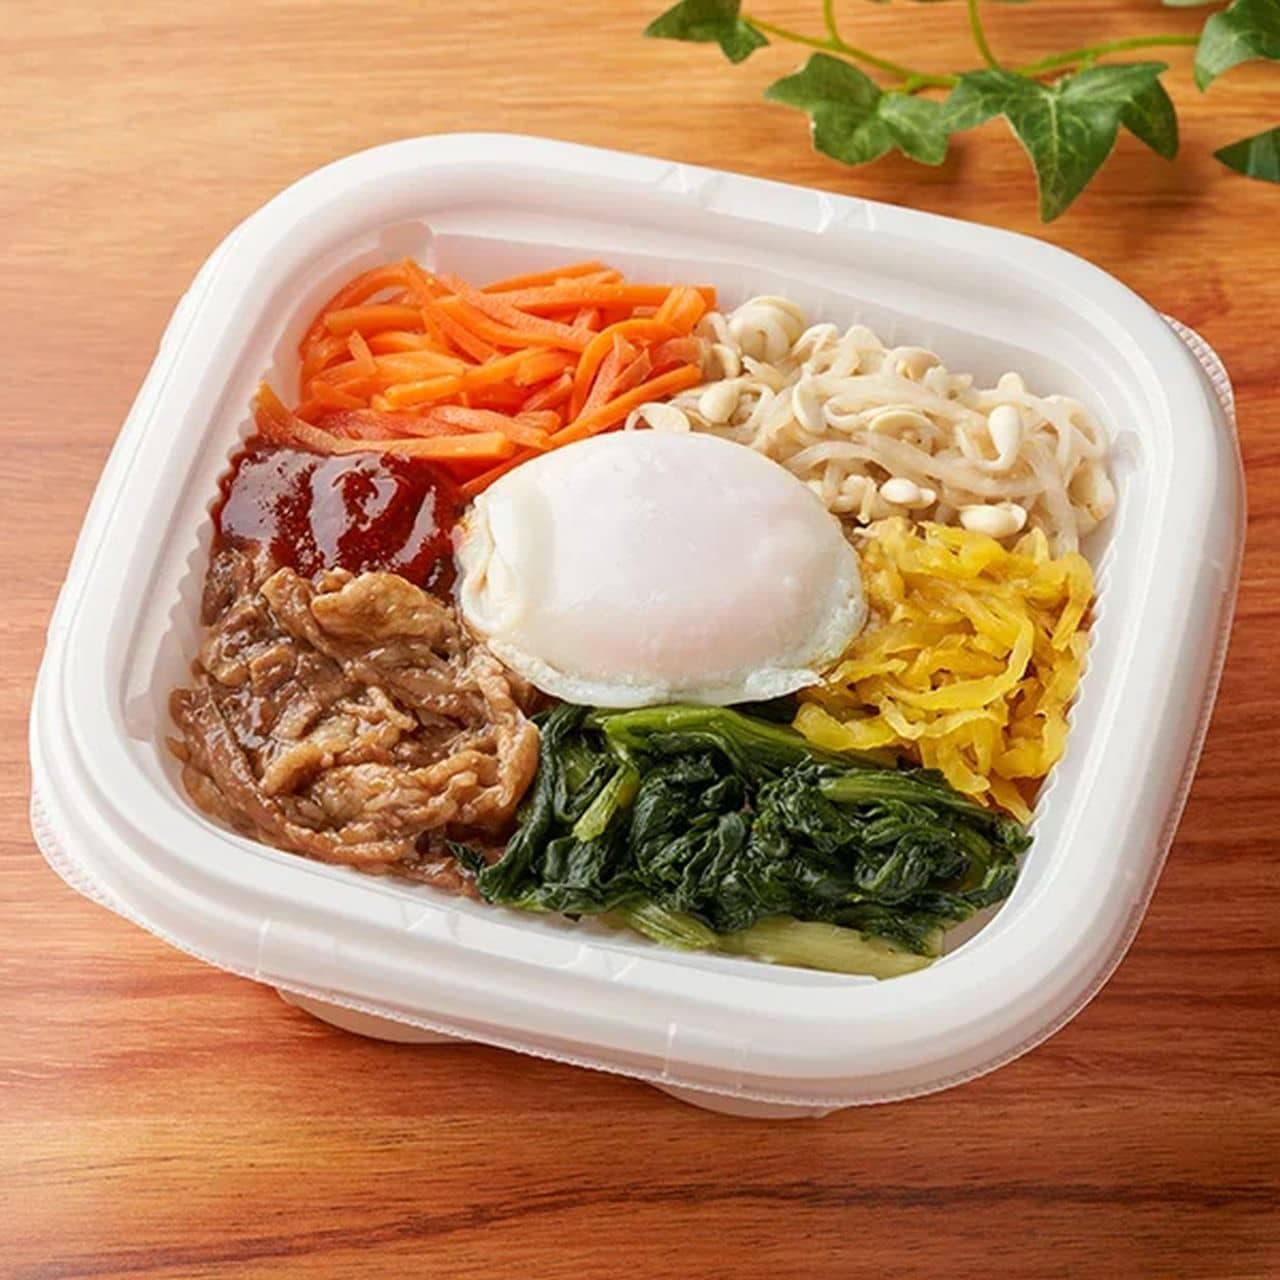 FamilyMart "Spicy and delicious bibimbap rice bowl with half-boiled egg